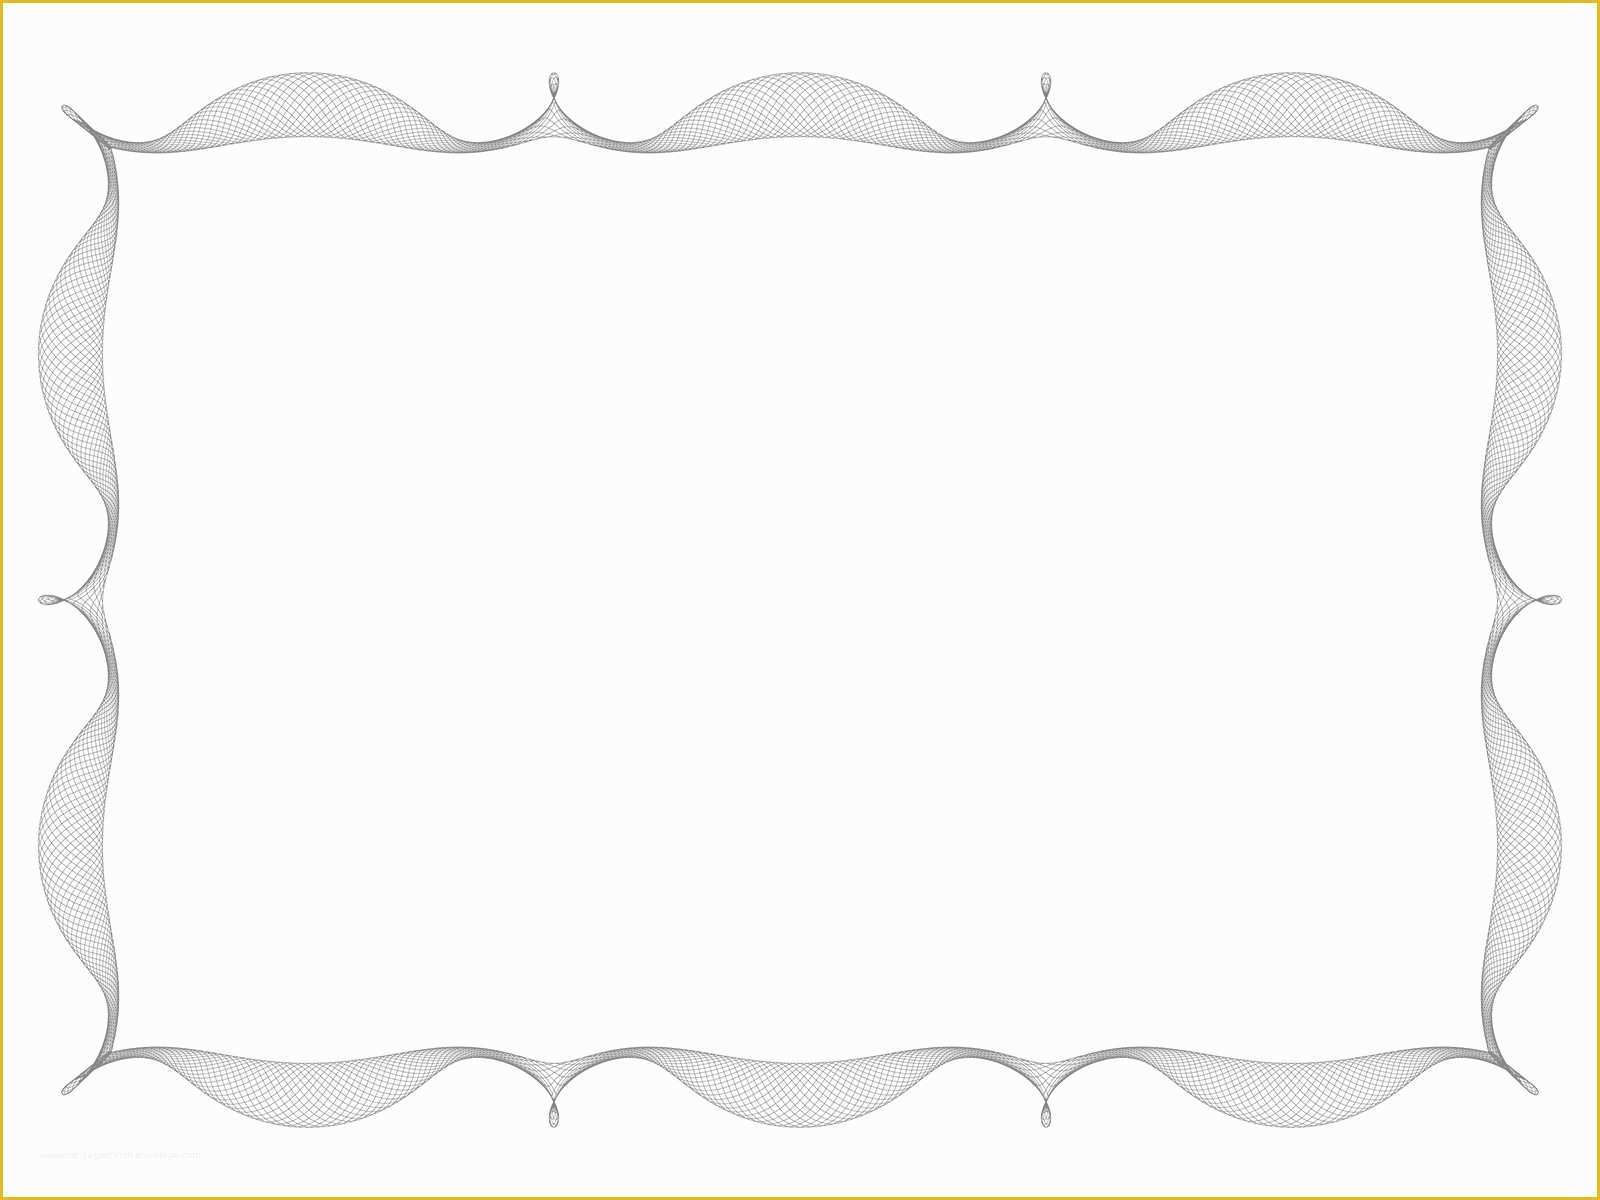 Free Border Templates for Powerpoint Of Like Frame Backgrounds